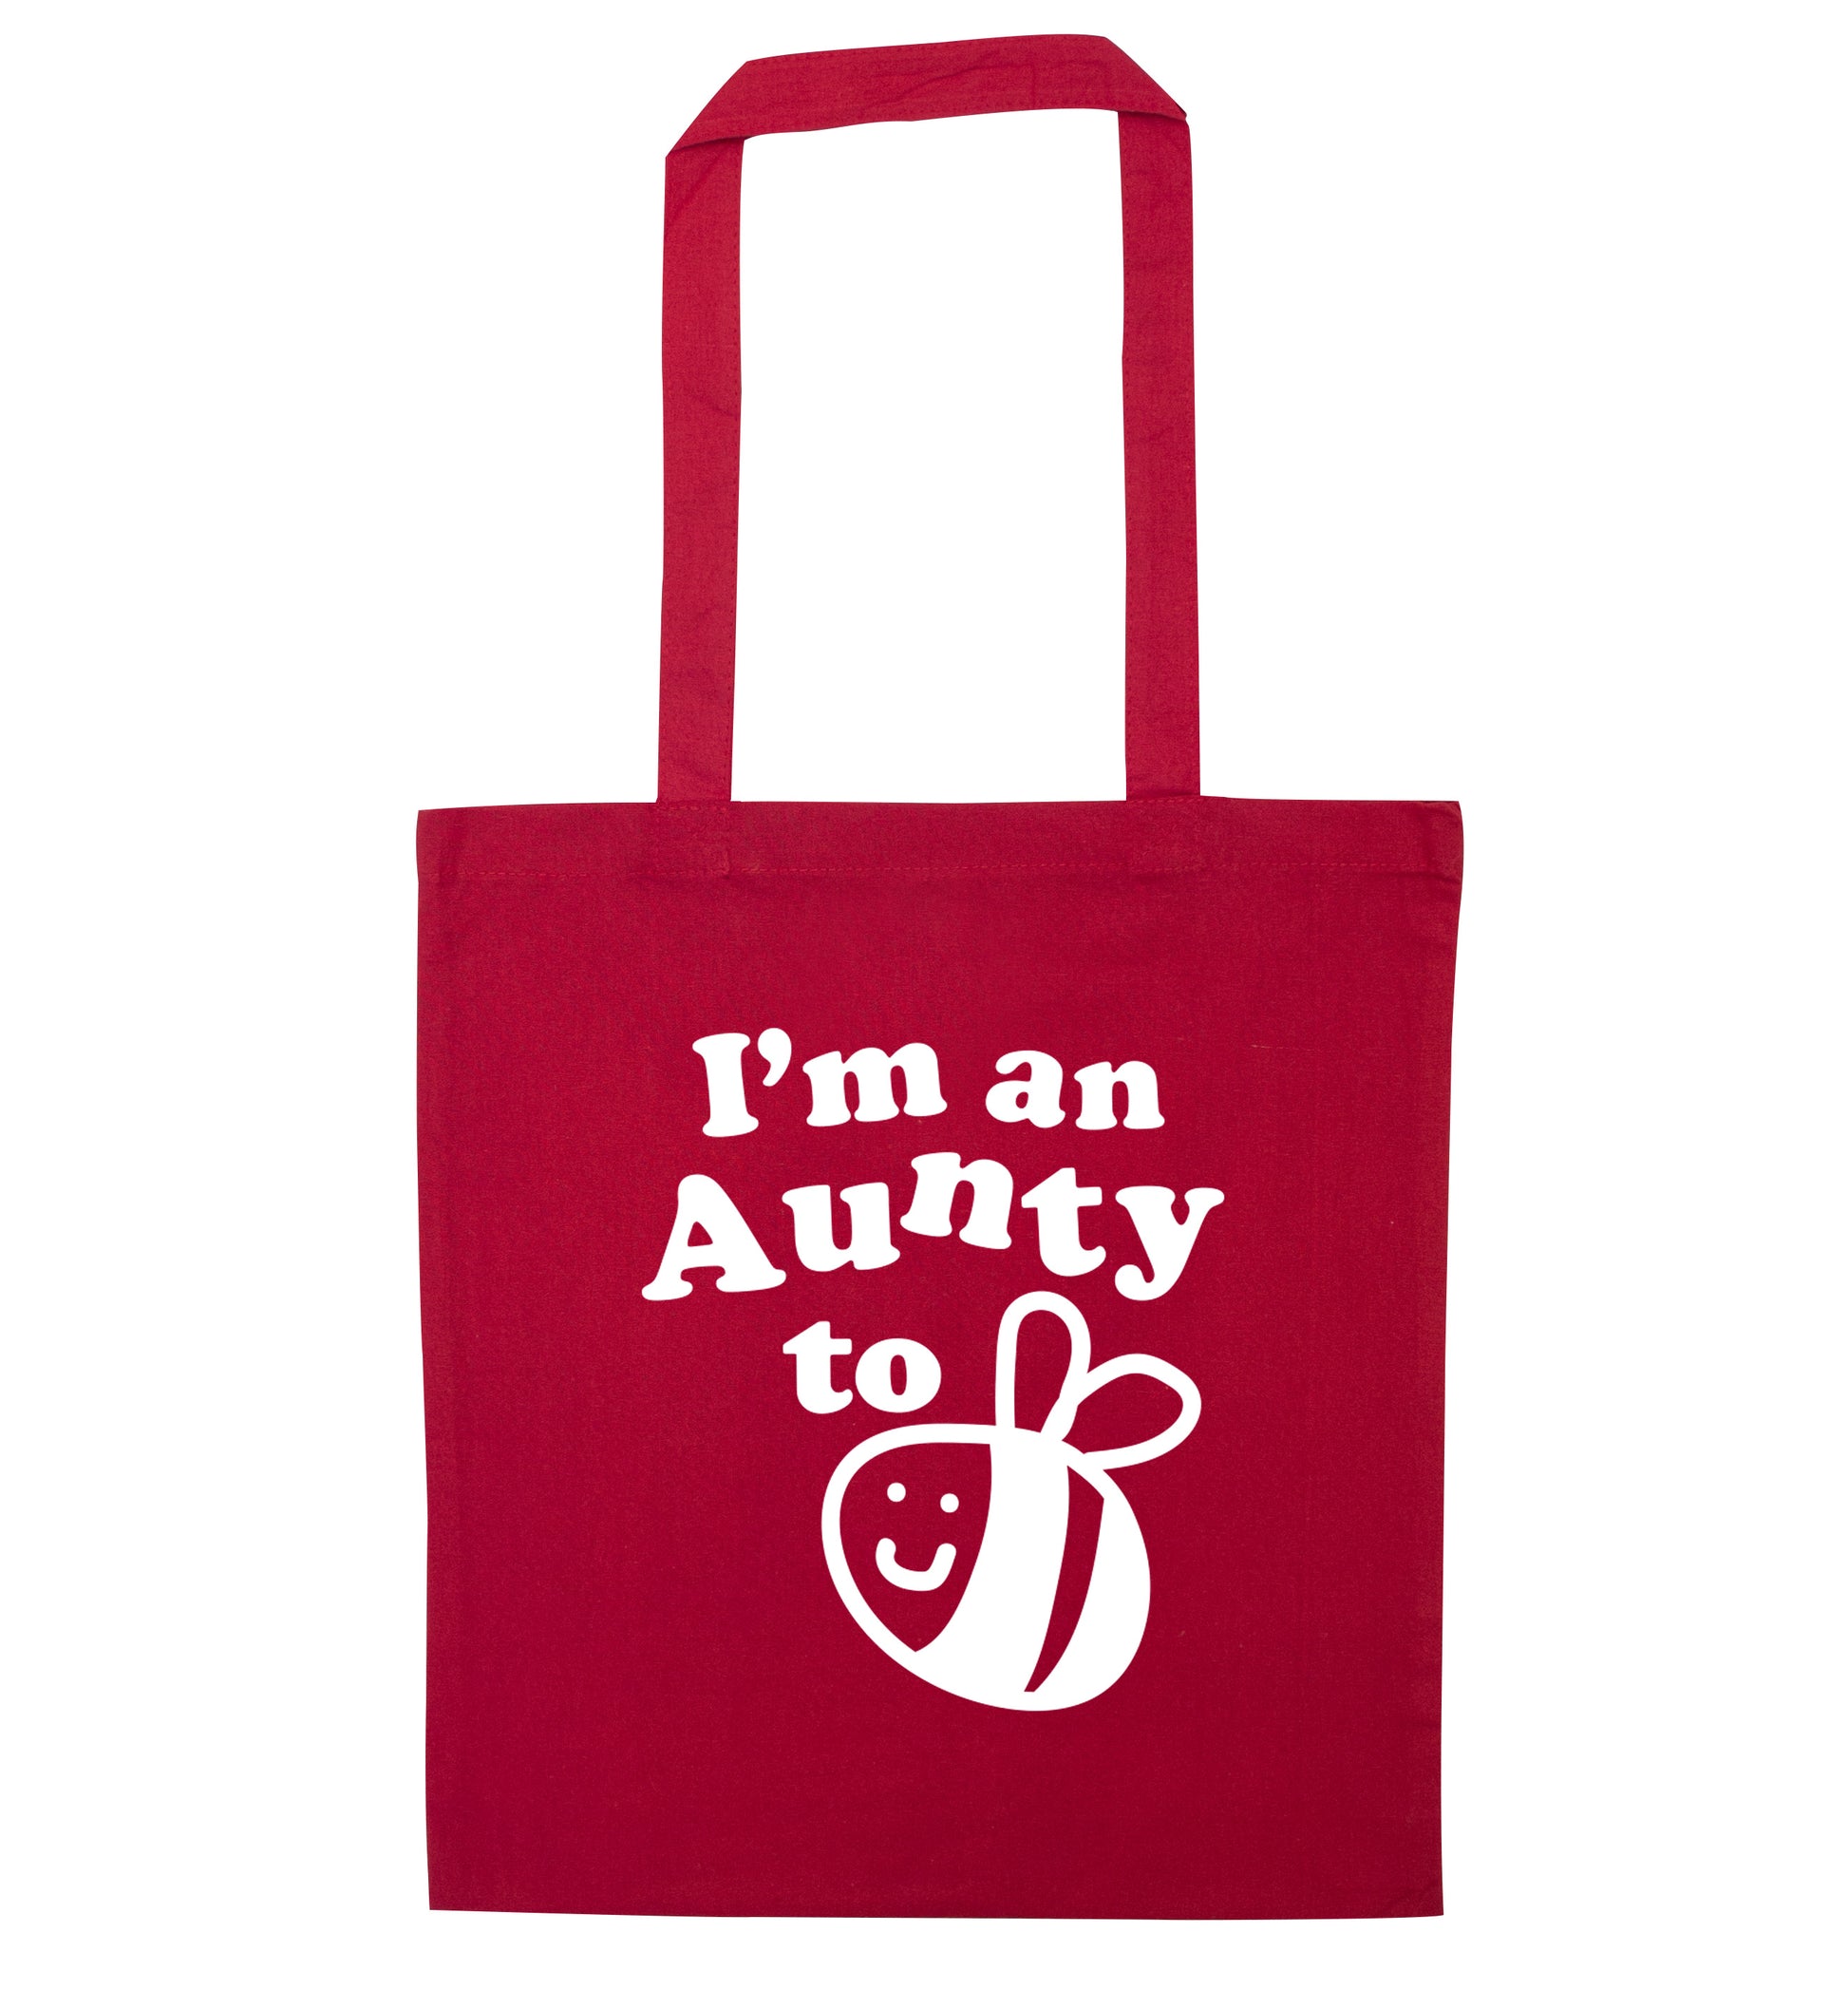 I'm an aunty to be red tote bag